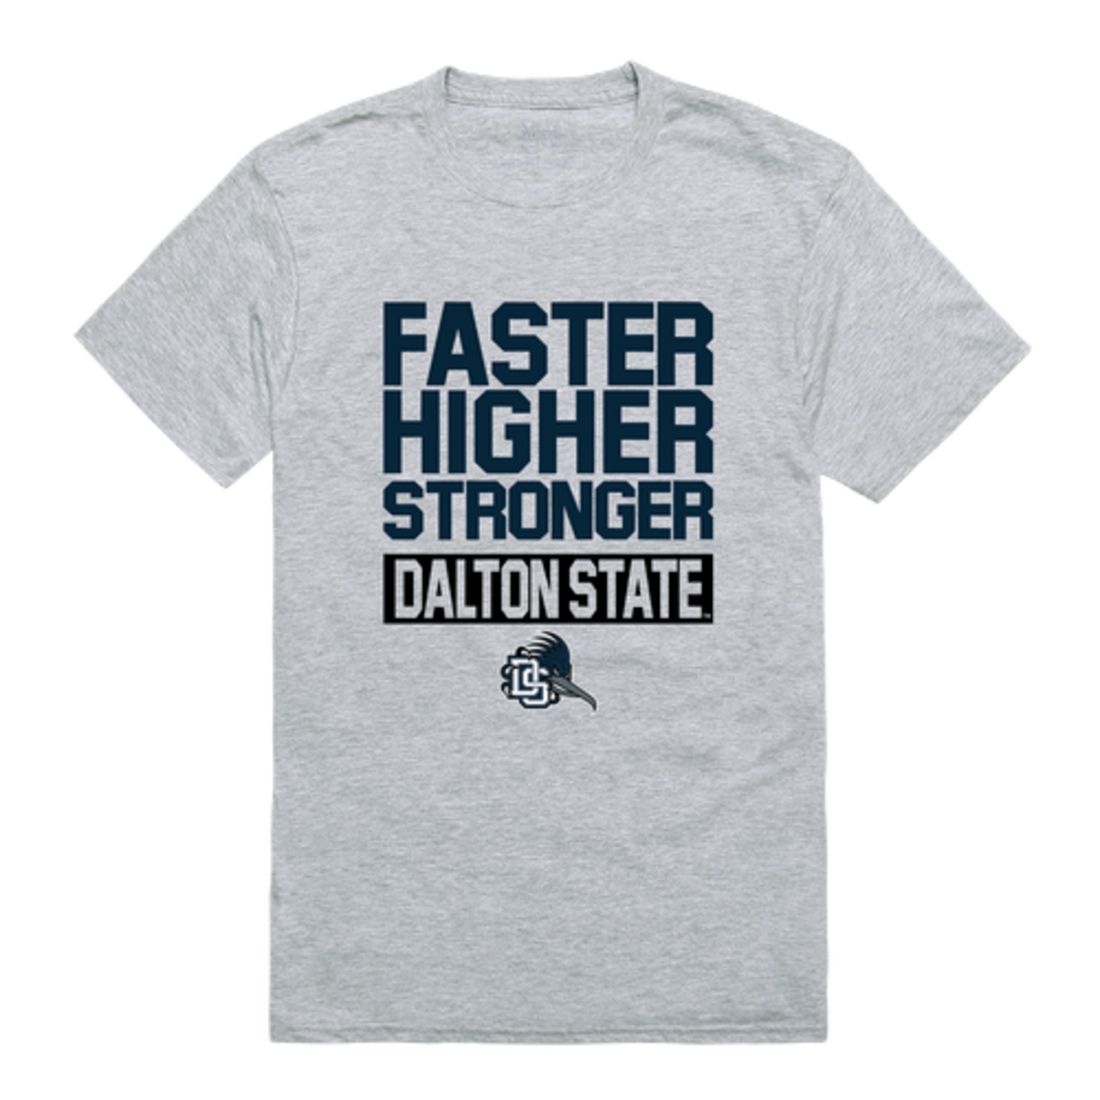 Dalton State College Roadrunners Workout T-Shirt Tee